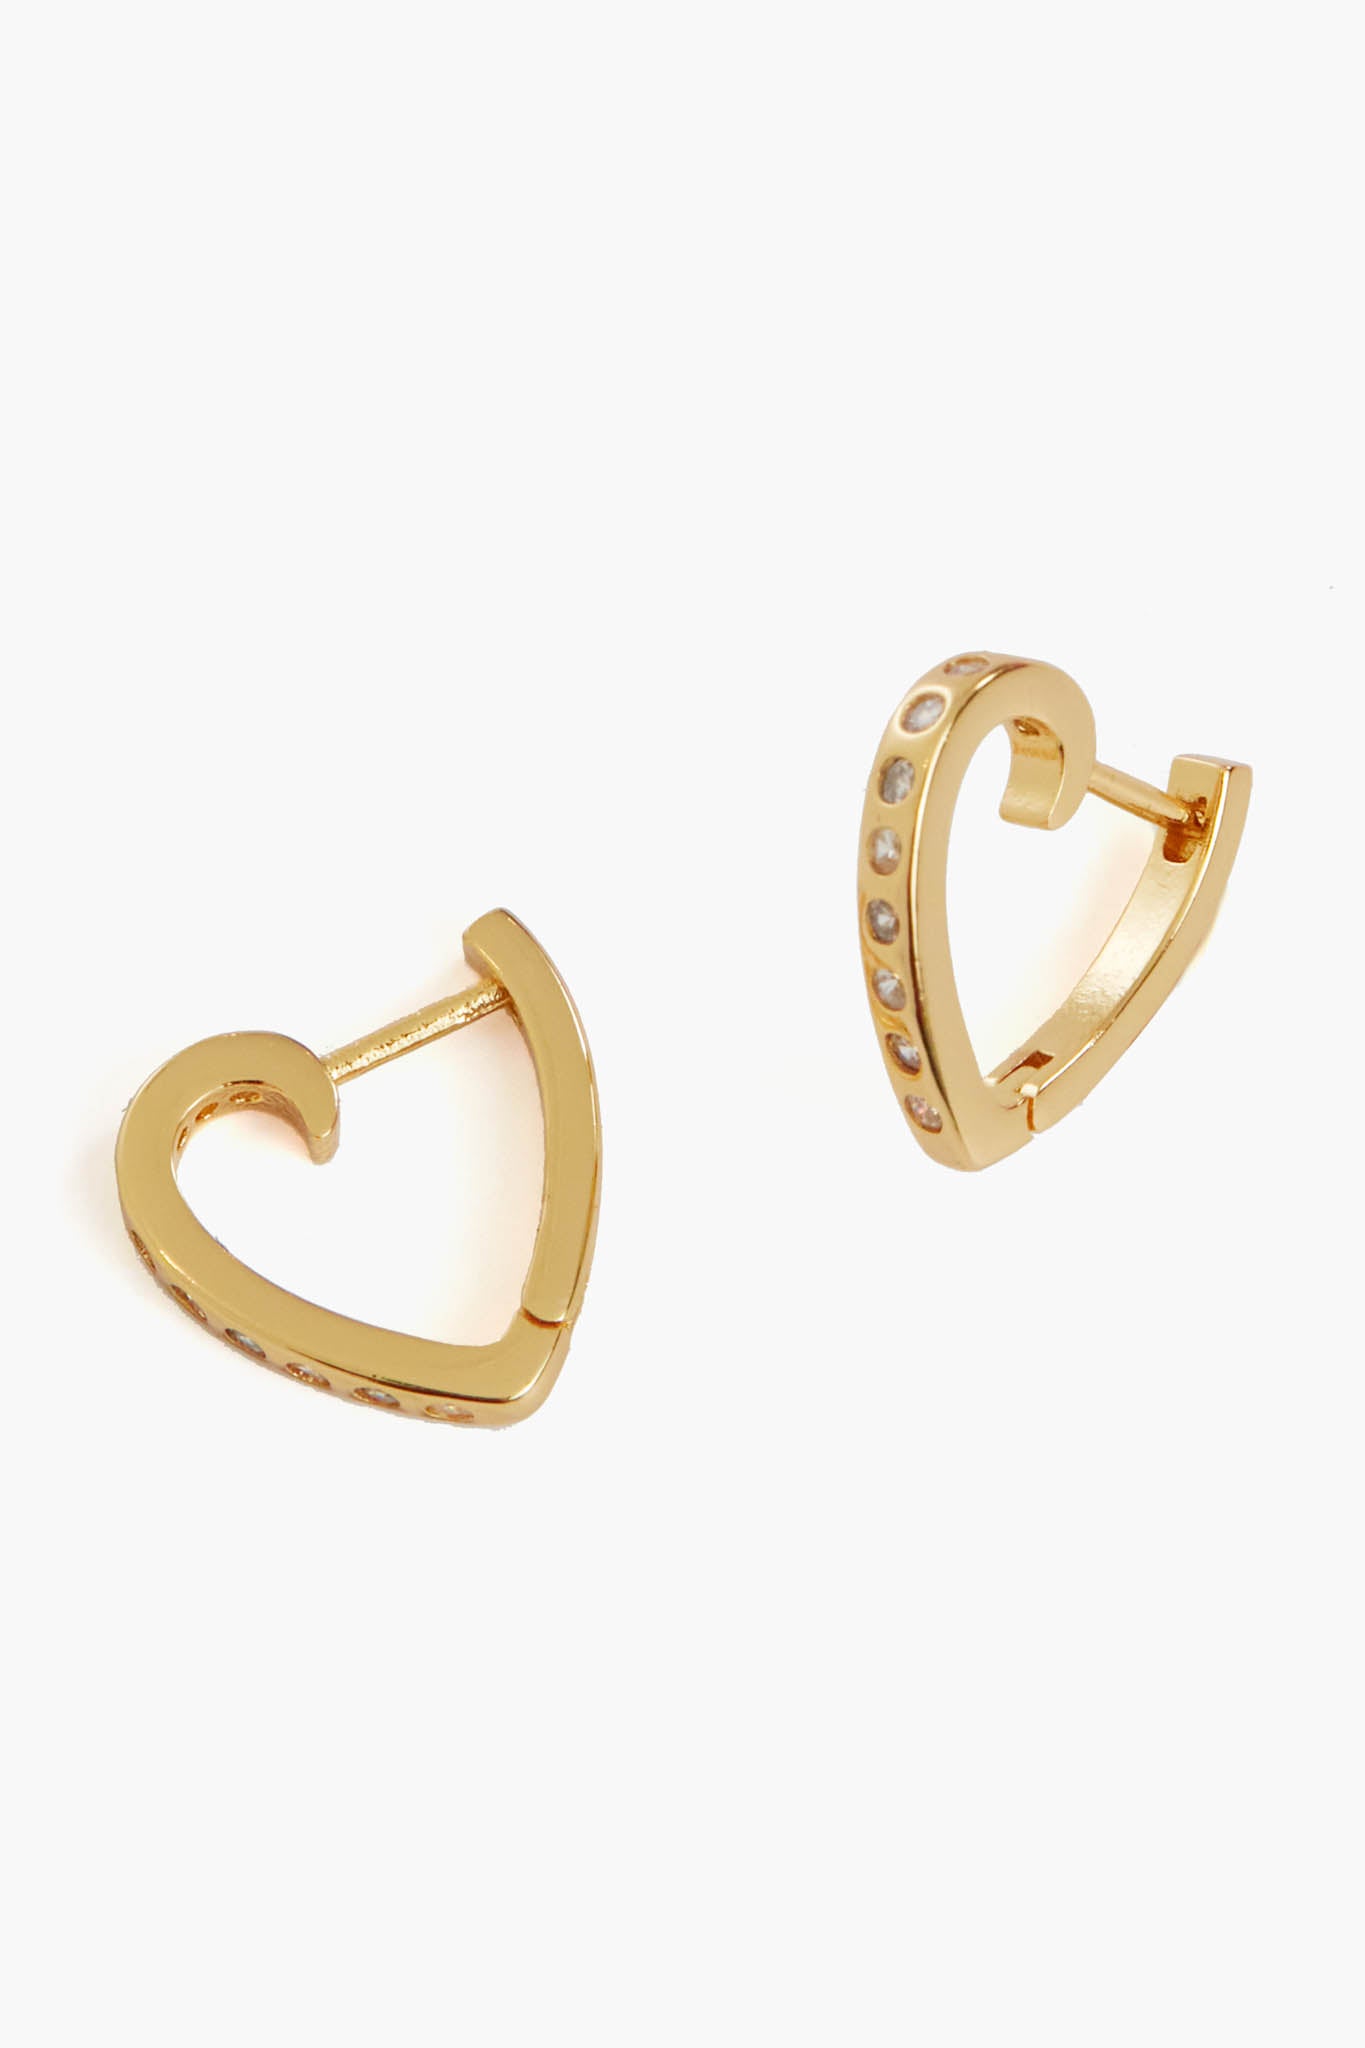 Gehena By Estele Heart Shaped Gold Plated Crystal Earrings For Women -  Combo of 3, multicolour, one size : Amazon.in: Fashion